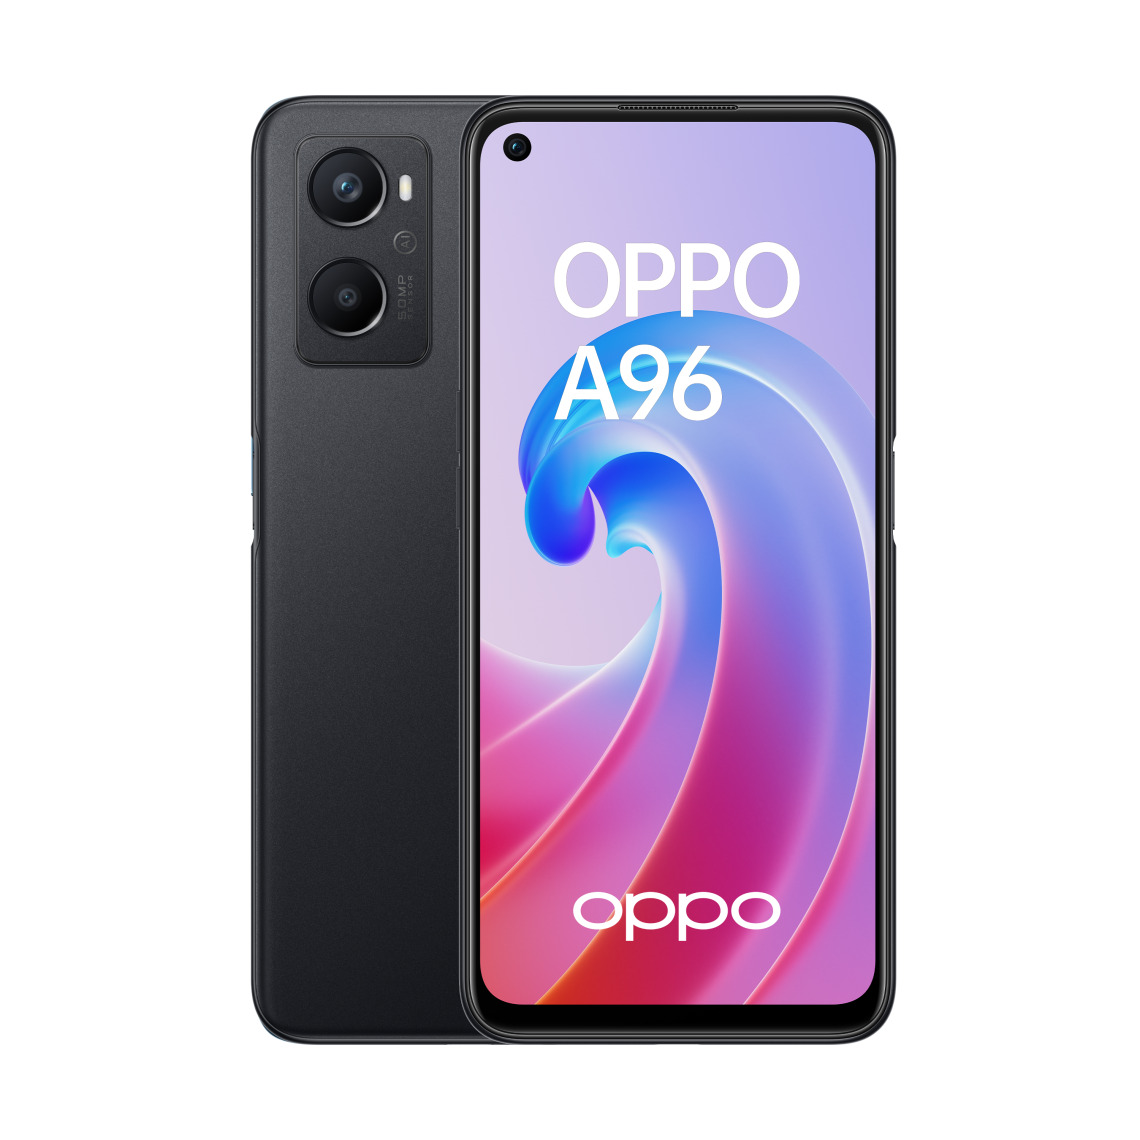 Oppo - A96 - 128Go - Noir - Smartphone Android